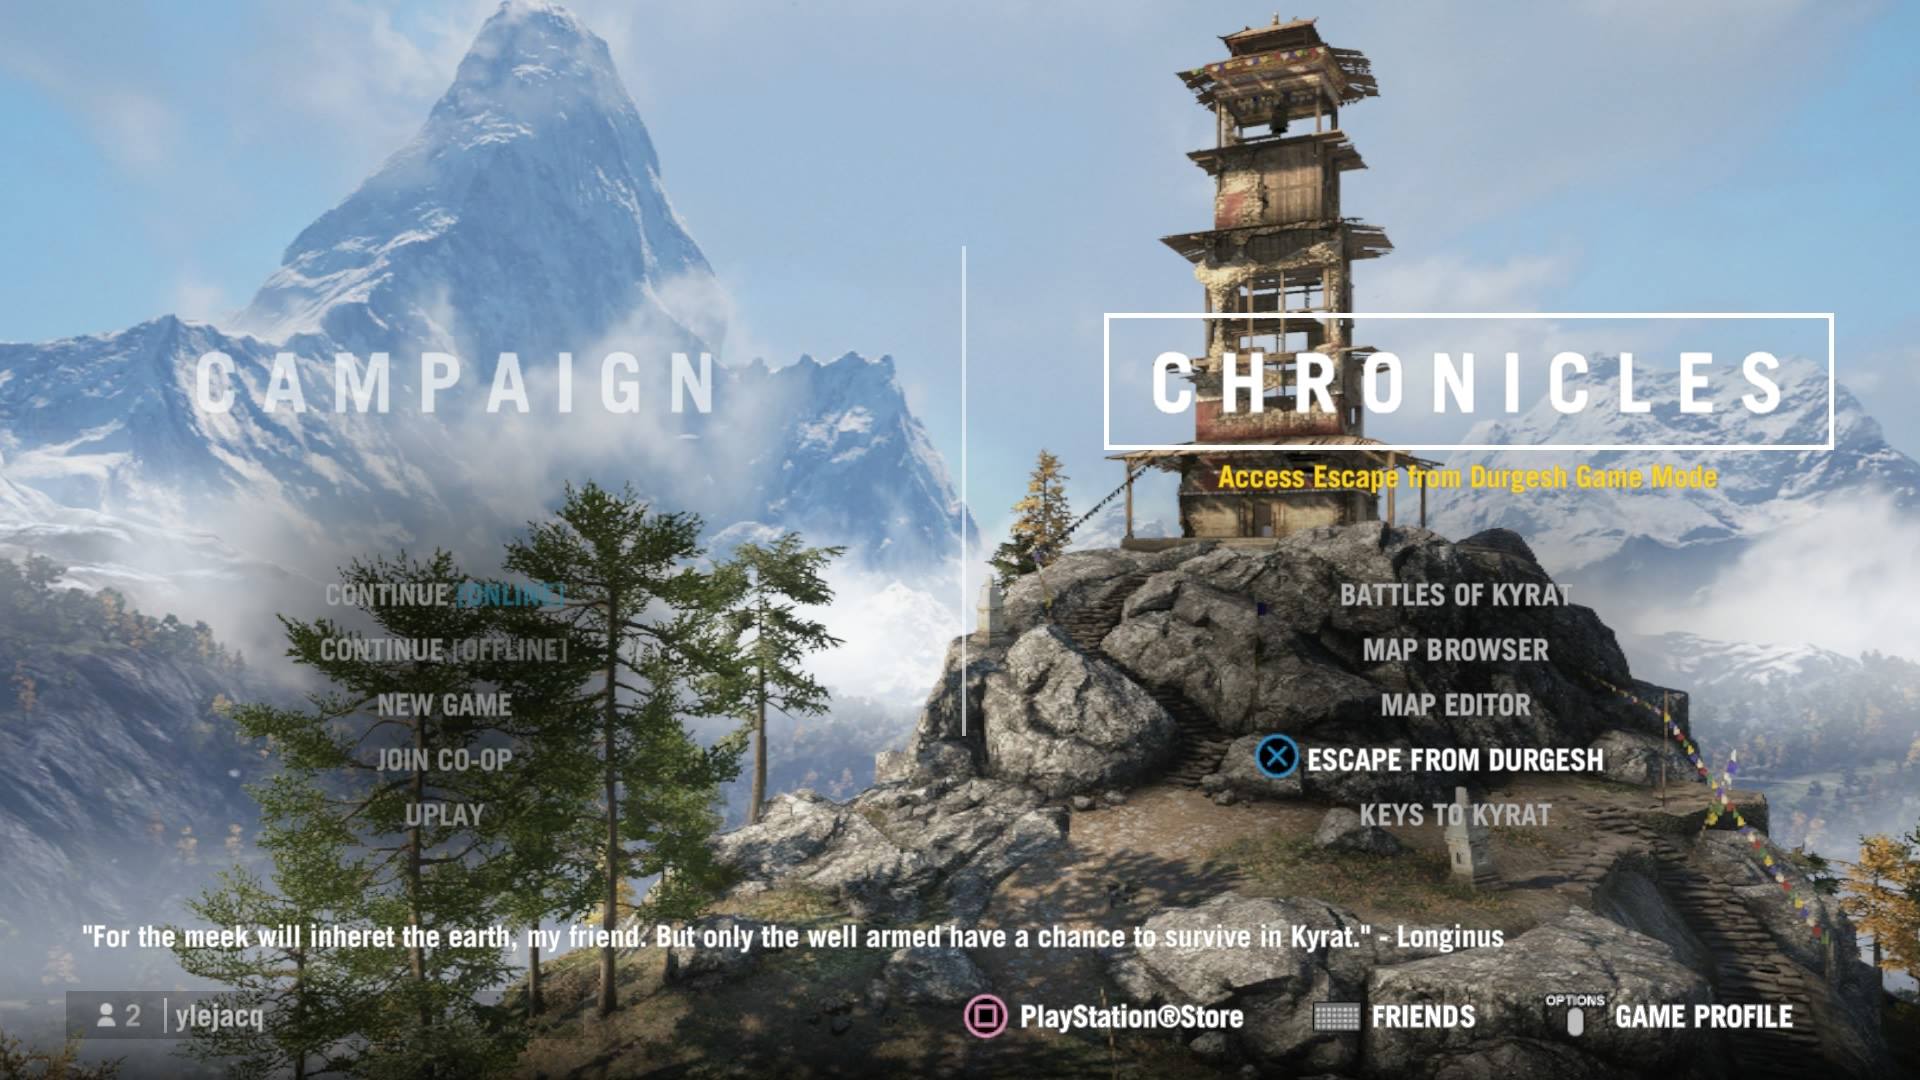 Far Cry 4’s New DLC Forces You To Grind Until You Die For No Good Reason